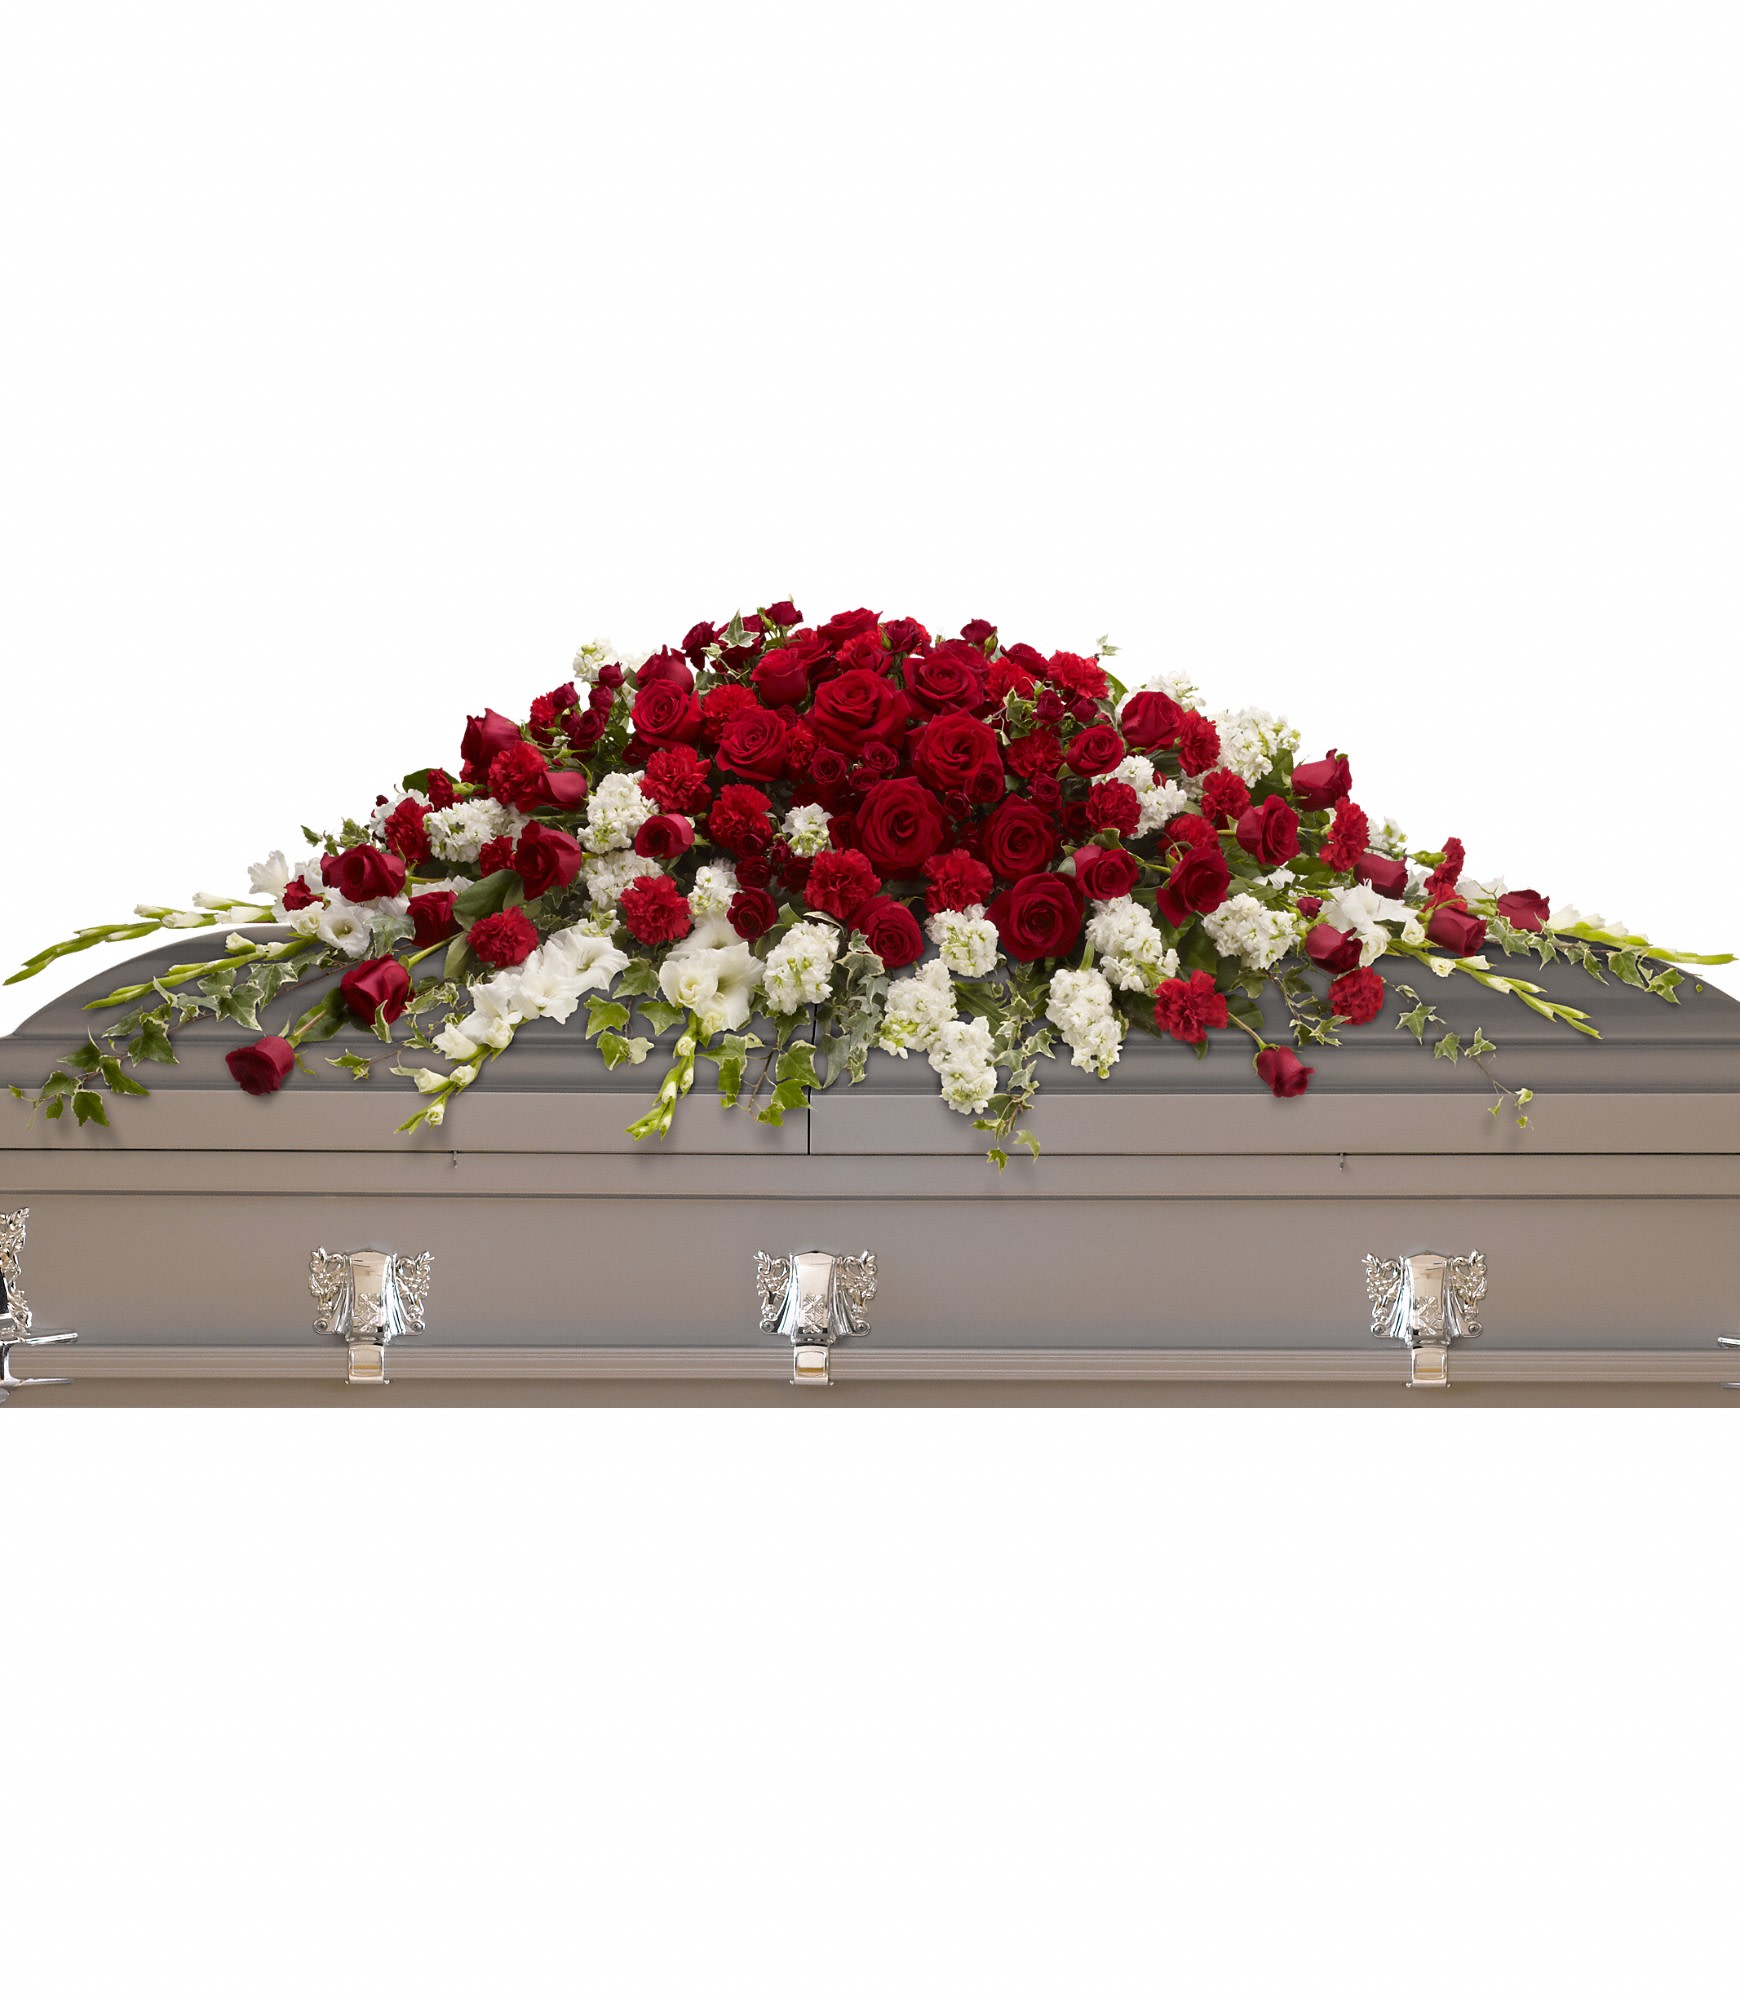 Garden of Grandeur Casket Spray by Teleflora - A traditional tribute that communicates deep love and eternal commitment. This dramatic red and white casket spray is ideal for a full couch or closed casket, mixing dozens of deep red roses with the pure white beauty of gladioli and stock.  